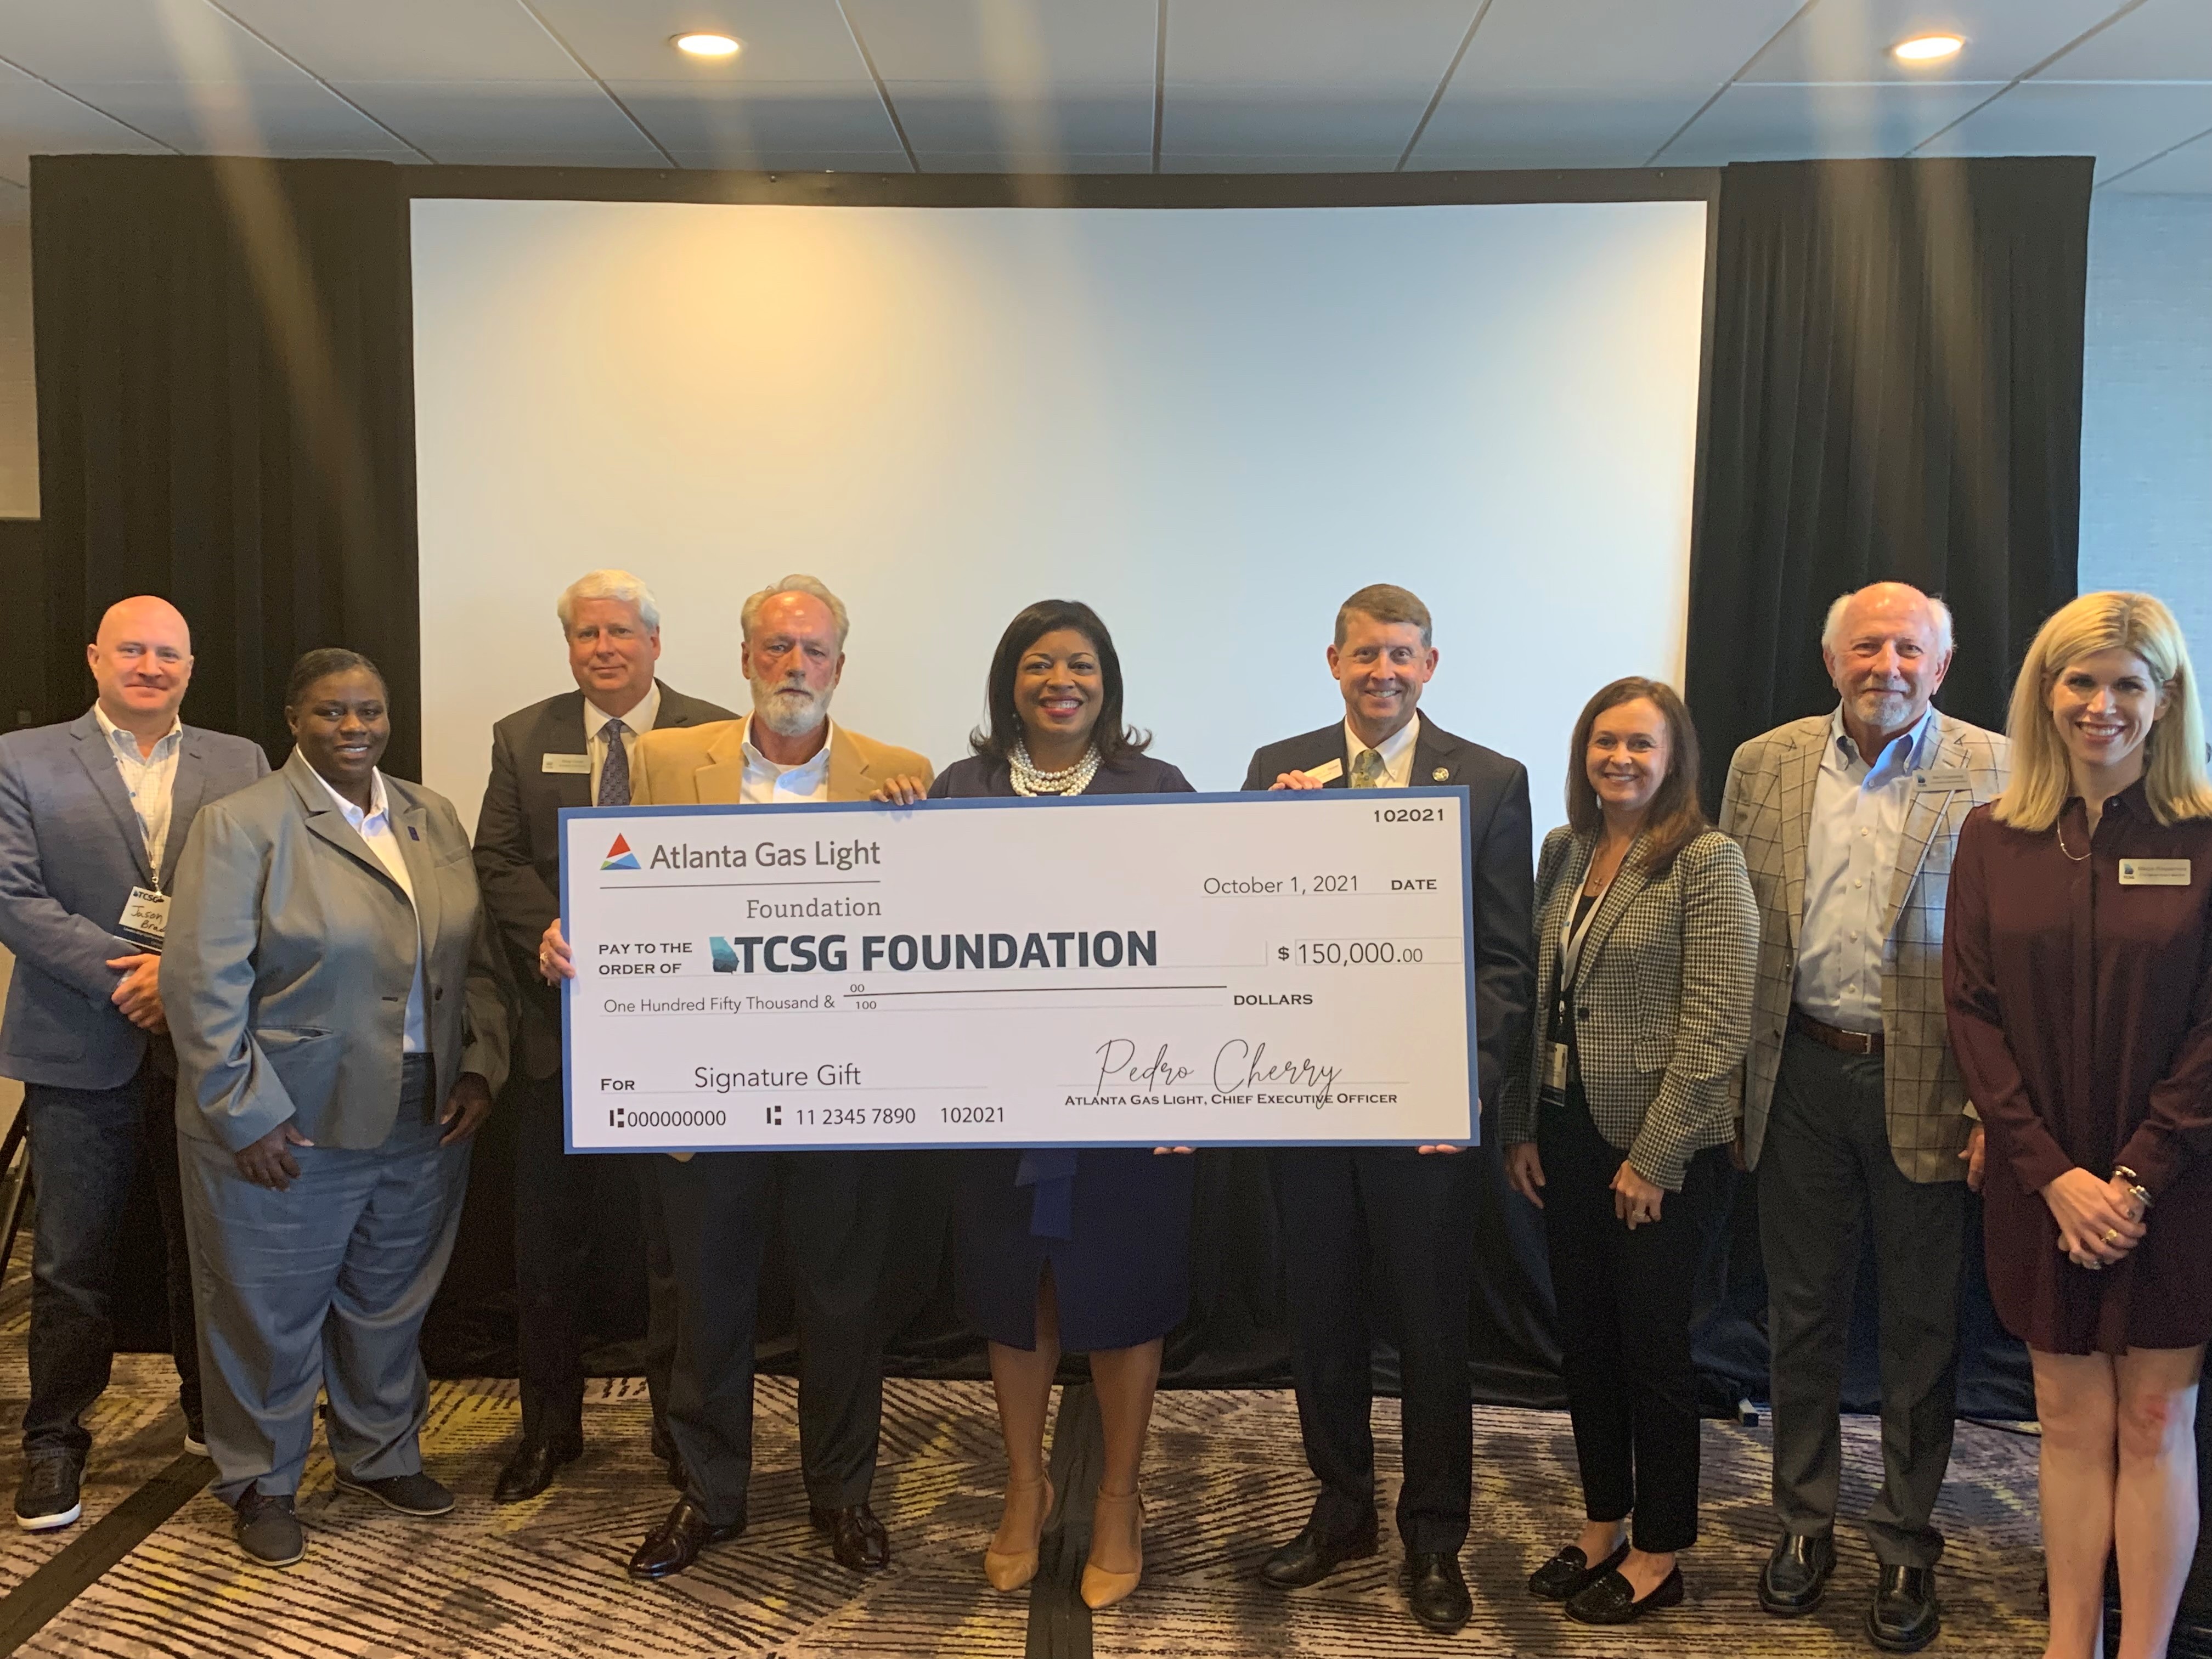 The Atlanta Gas Light Foundation presented a $150,000 gift to TCSG Tuesday afternoon. The funding will provide equipment to and facility upgrades for TCSG’s HVAC and Pipefitting programs, as well as address the critical need for gap-funding for TCSG students.